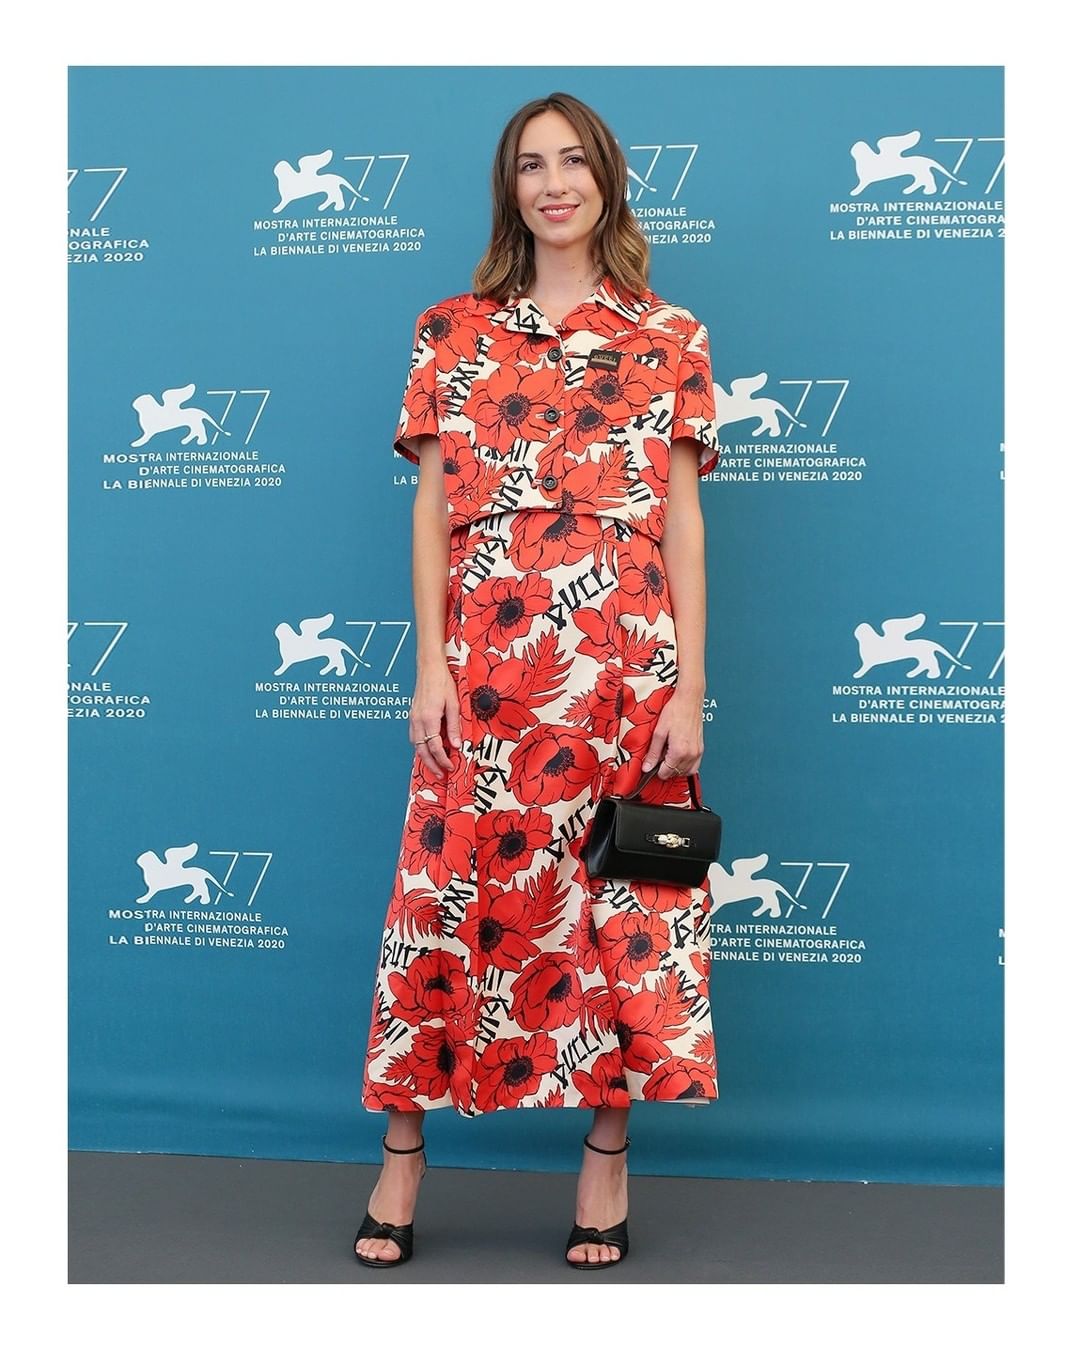 Gucci Official - Gia Coppola @mastergia wore a #GucciPreFall20 printed silk duchesse jacket with embroidered label detail with a boat neck midi dress, high heel sandals with knot and a leather clutch...